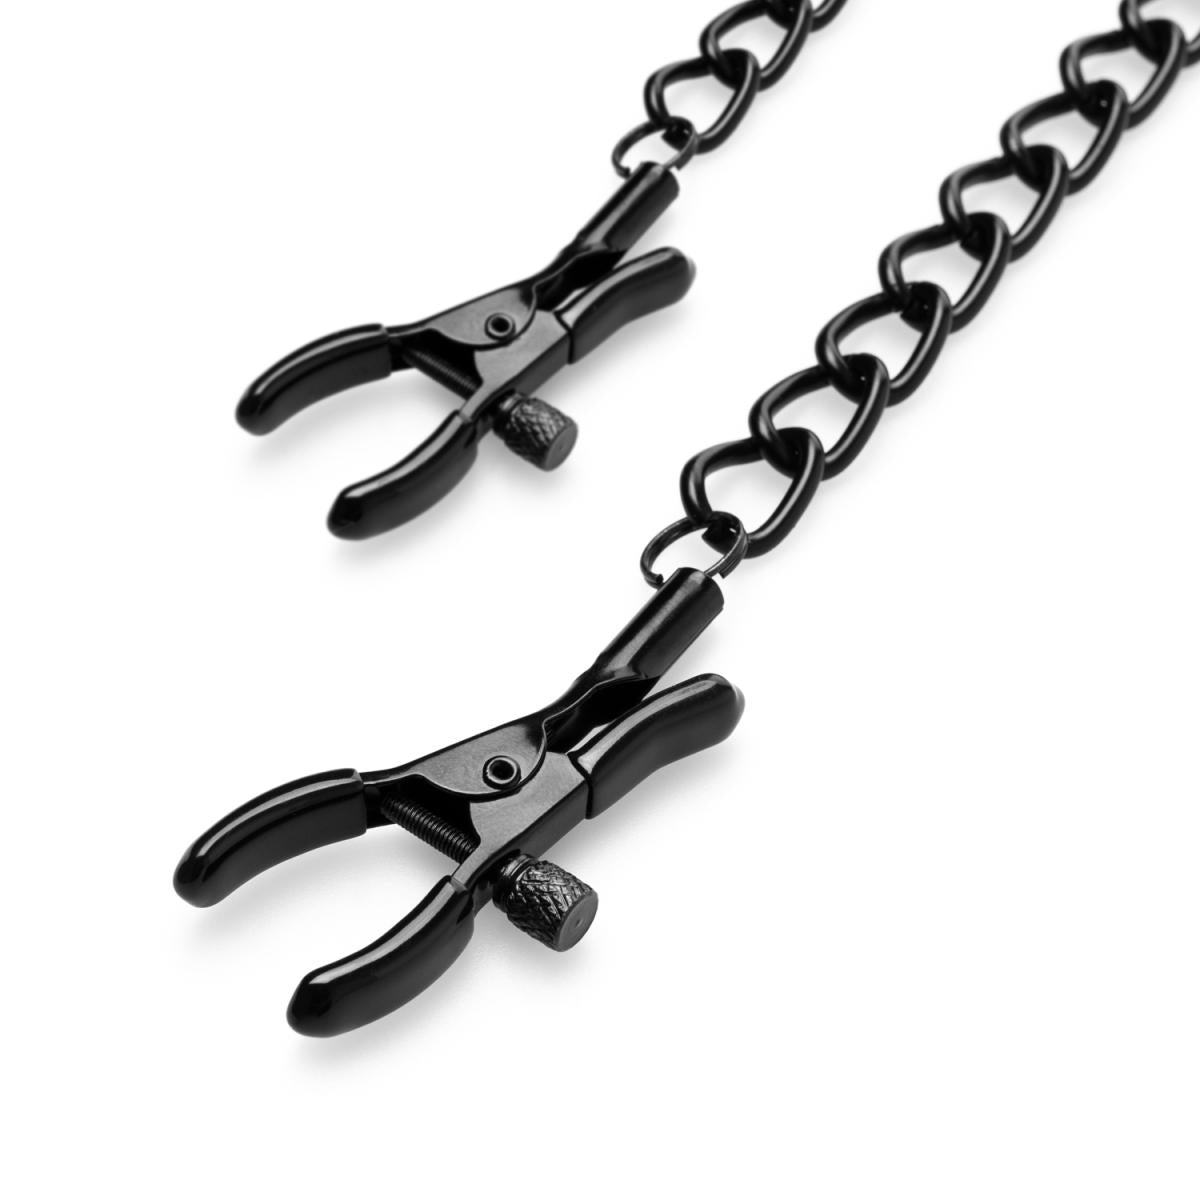 Bedroom Fantasies Nipple Clamps with Chain